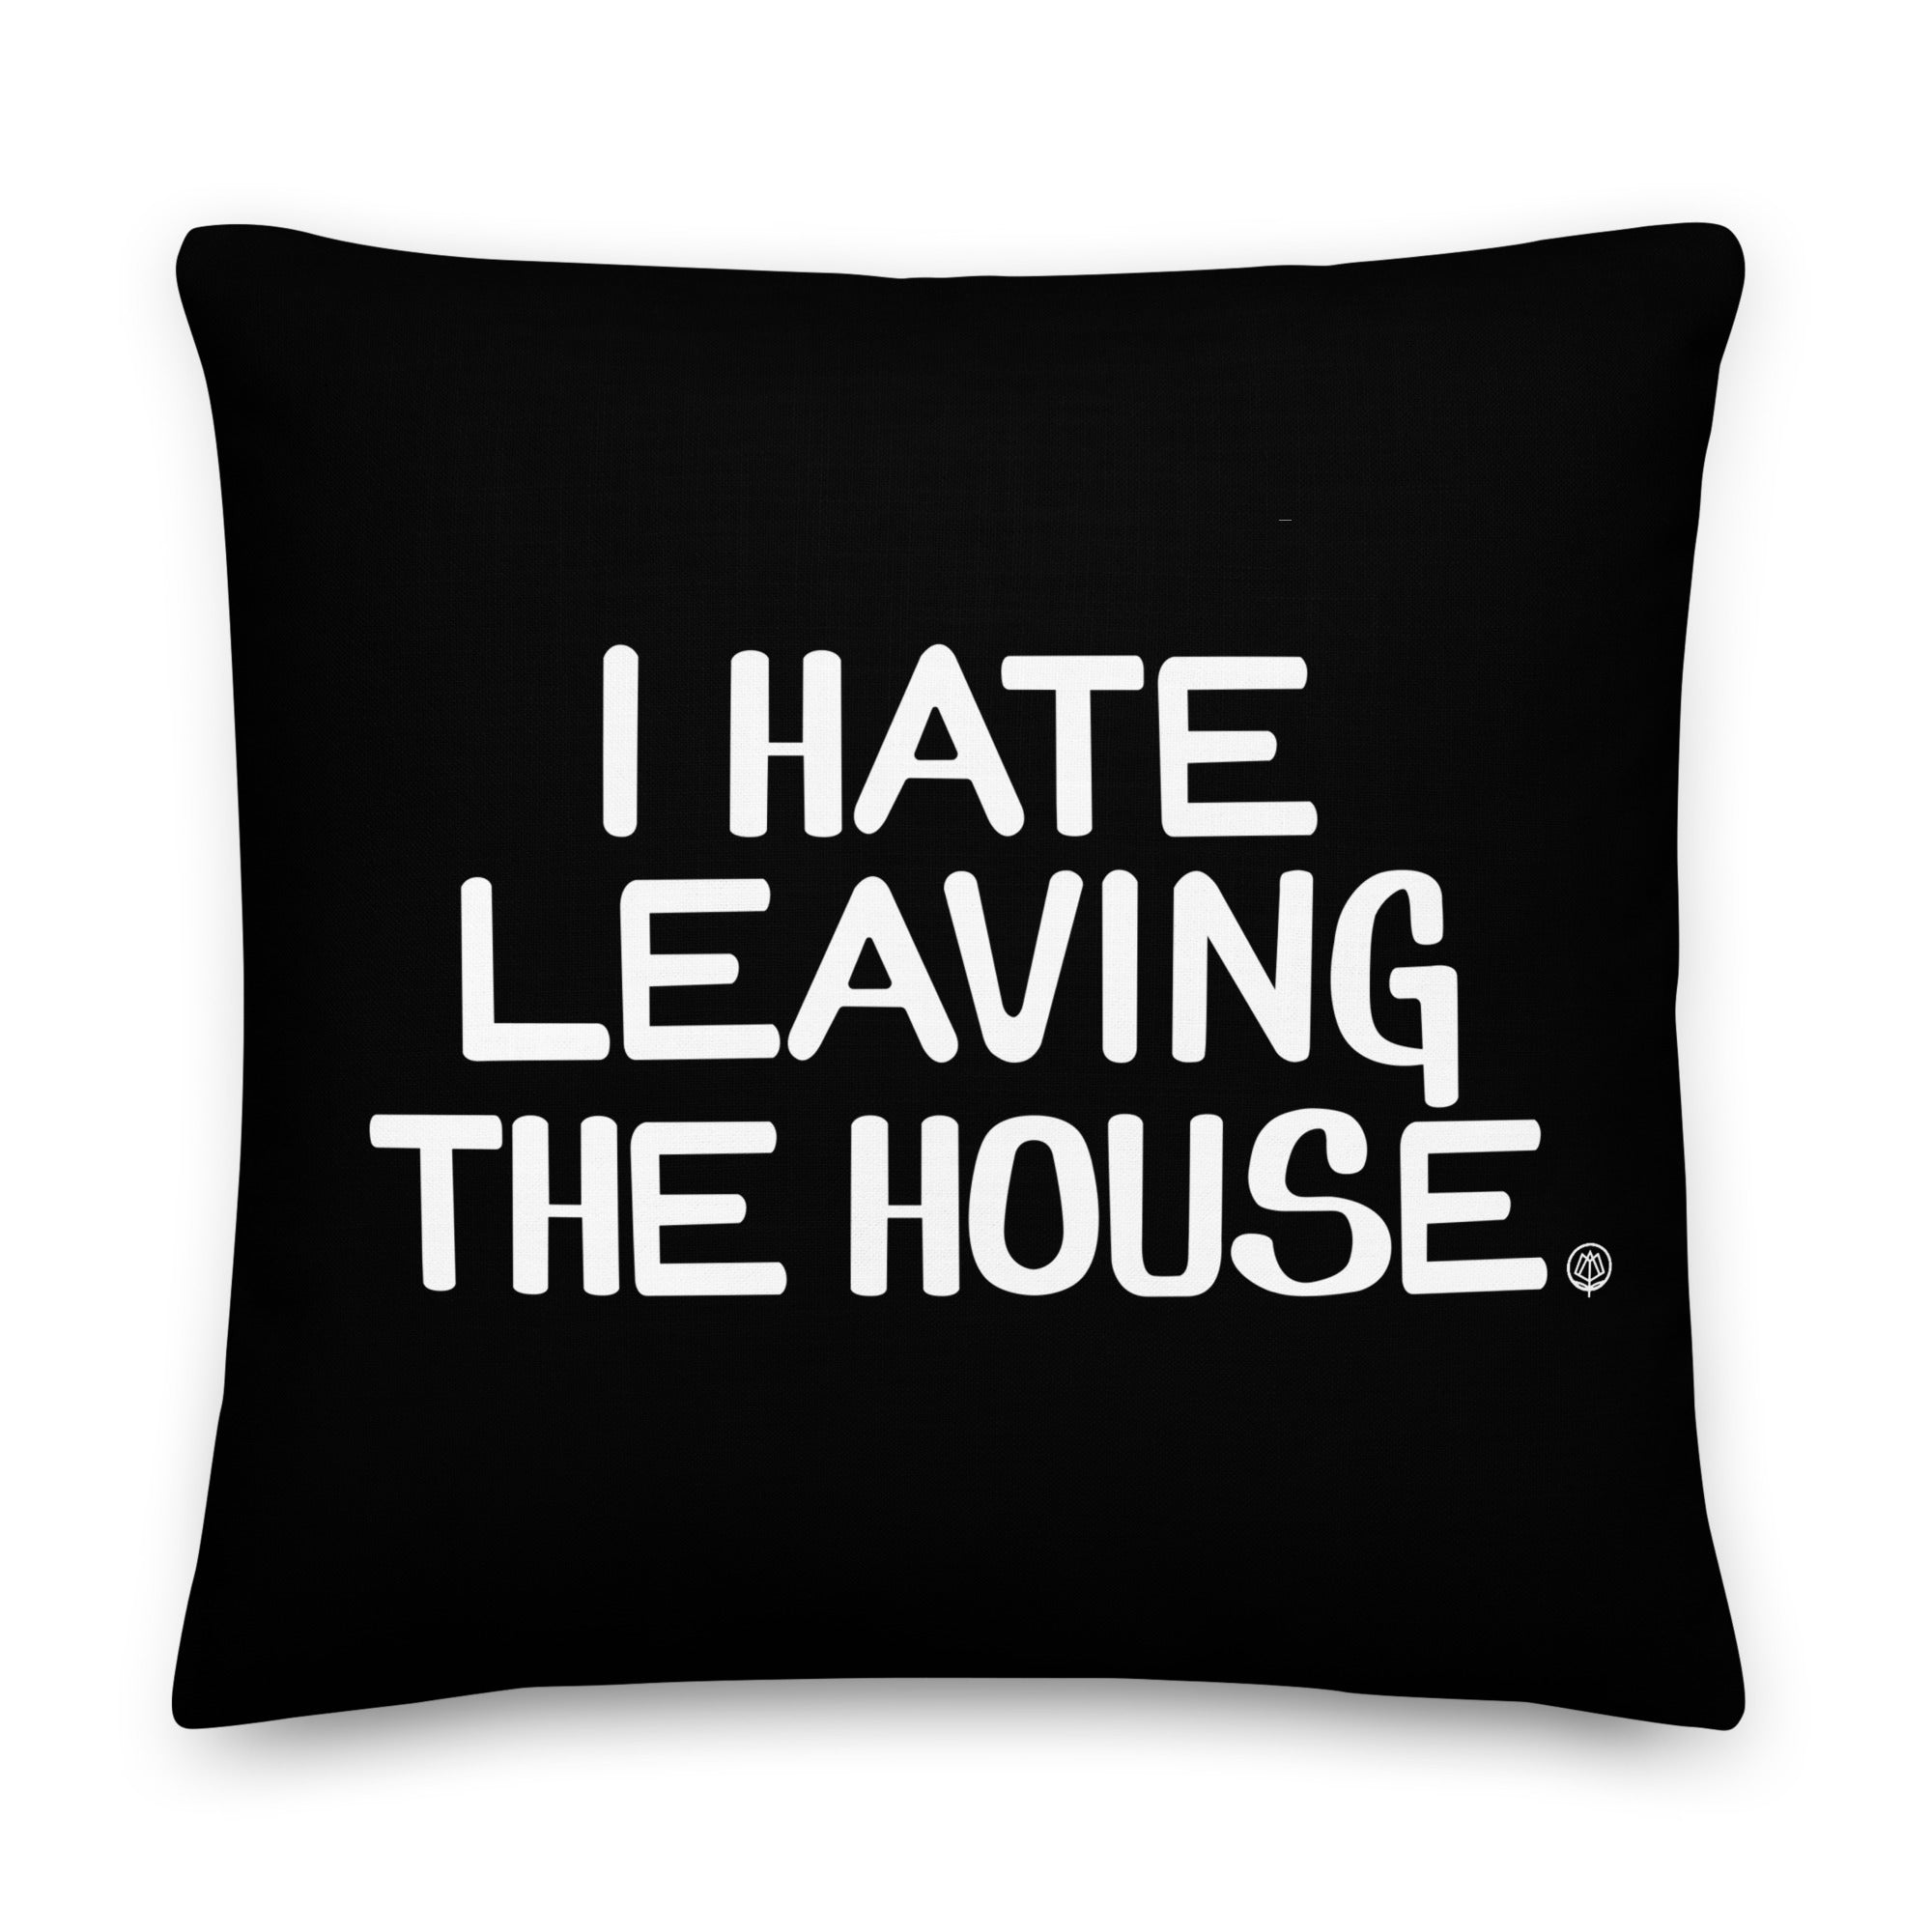 I Hate Leaving the House Pillow - Black